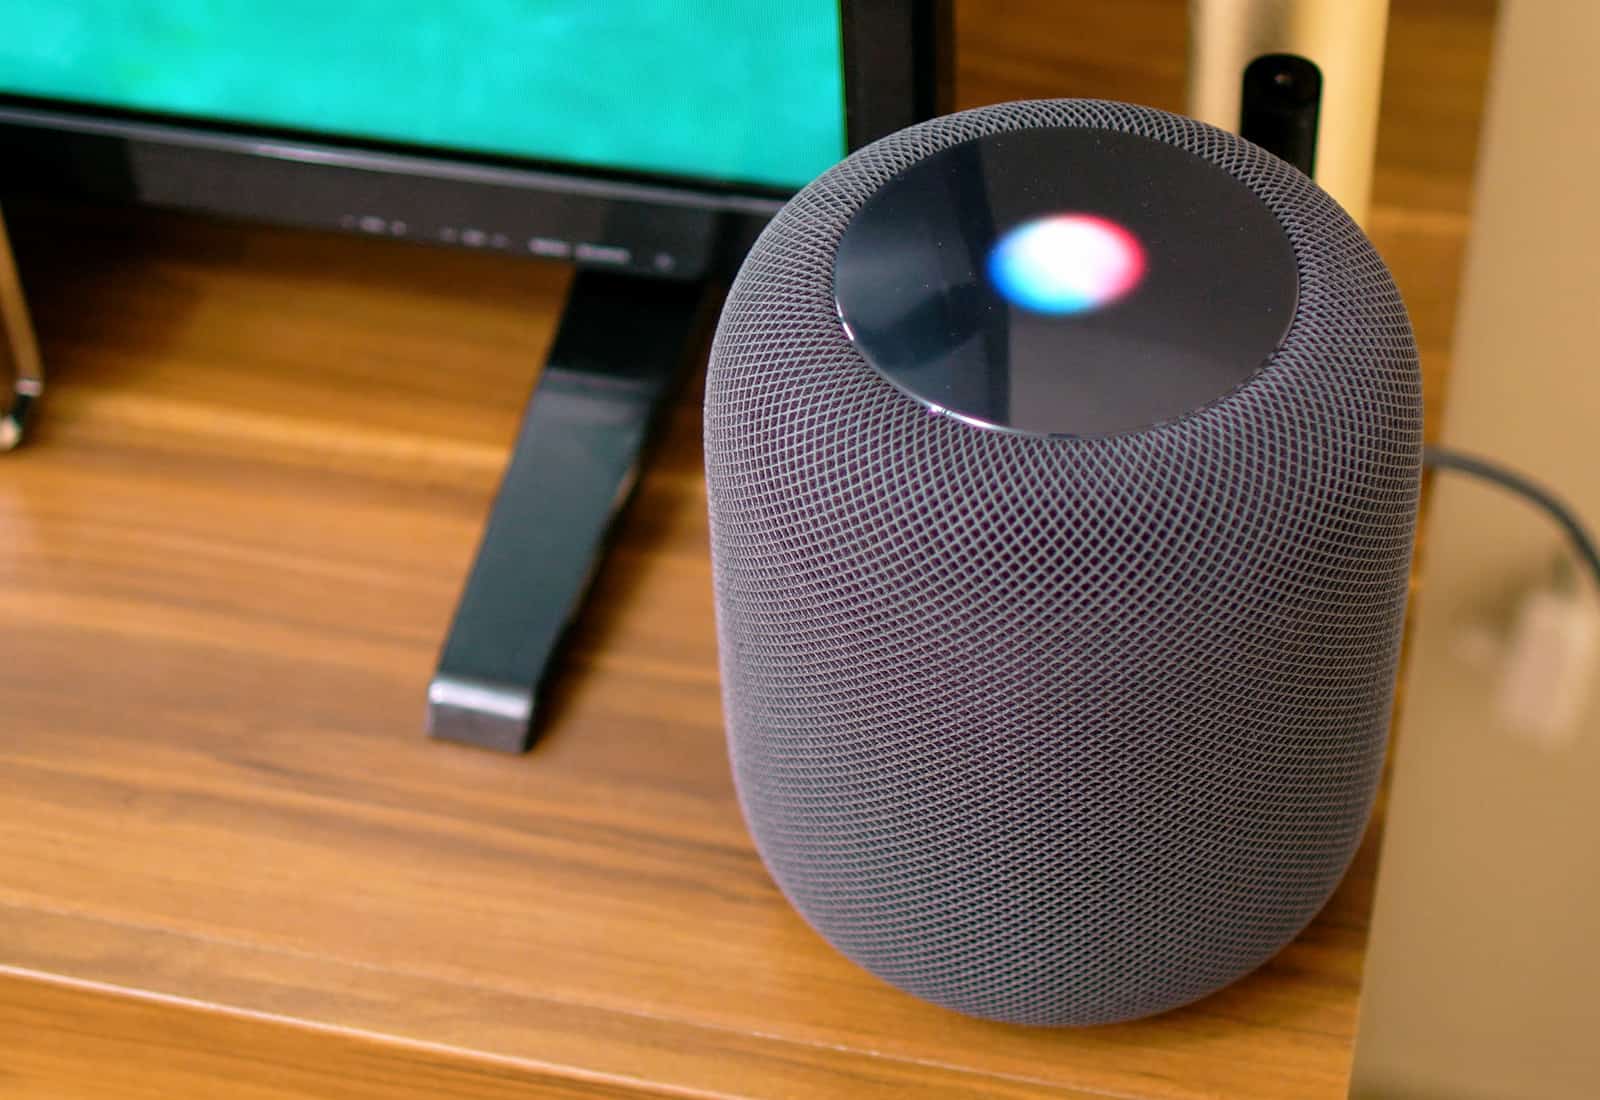 The HomePod is a lot smarter than you might think. Just take a look at these tips!